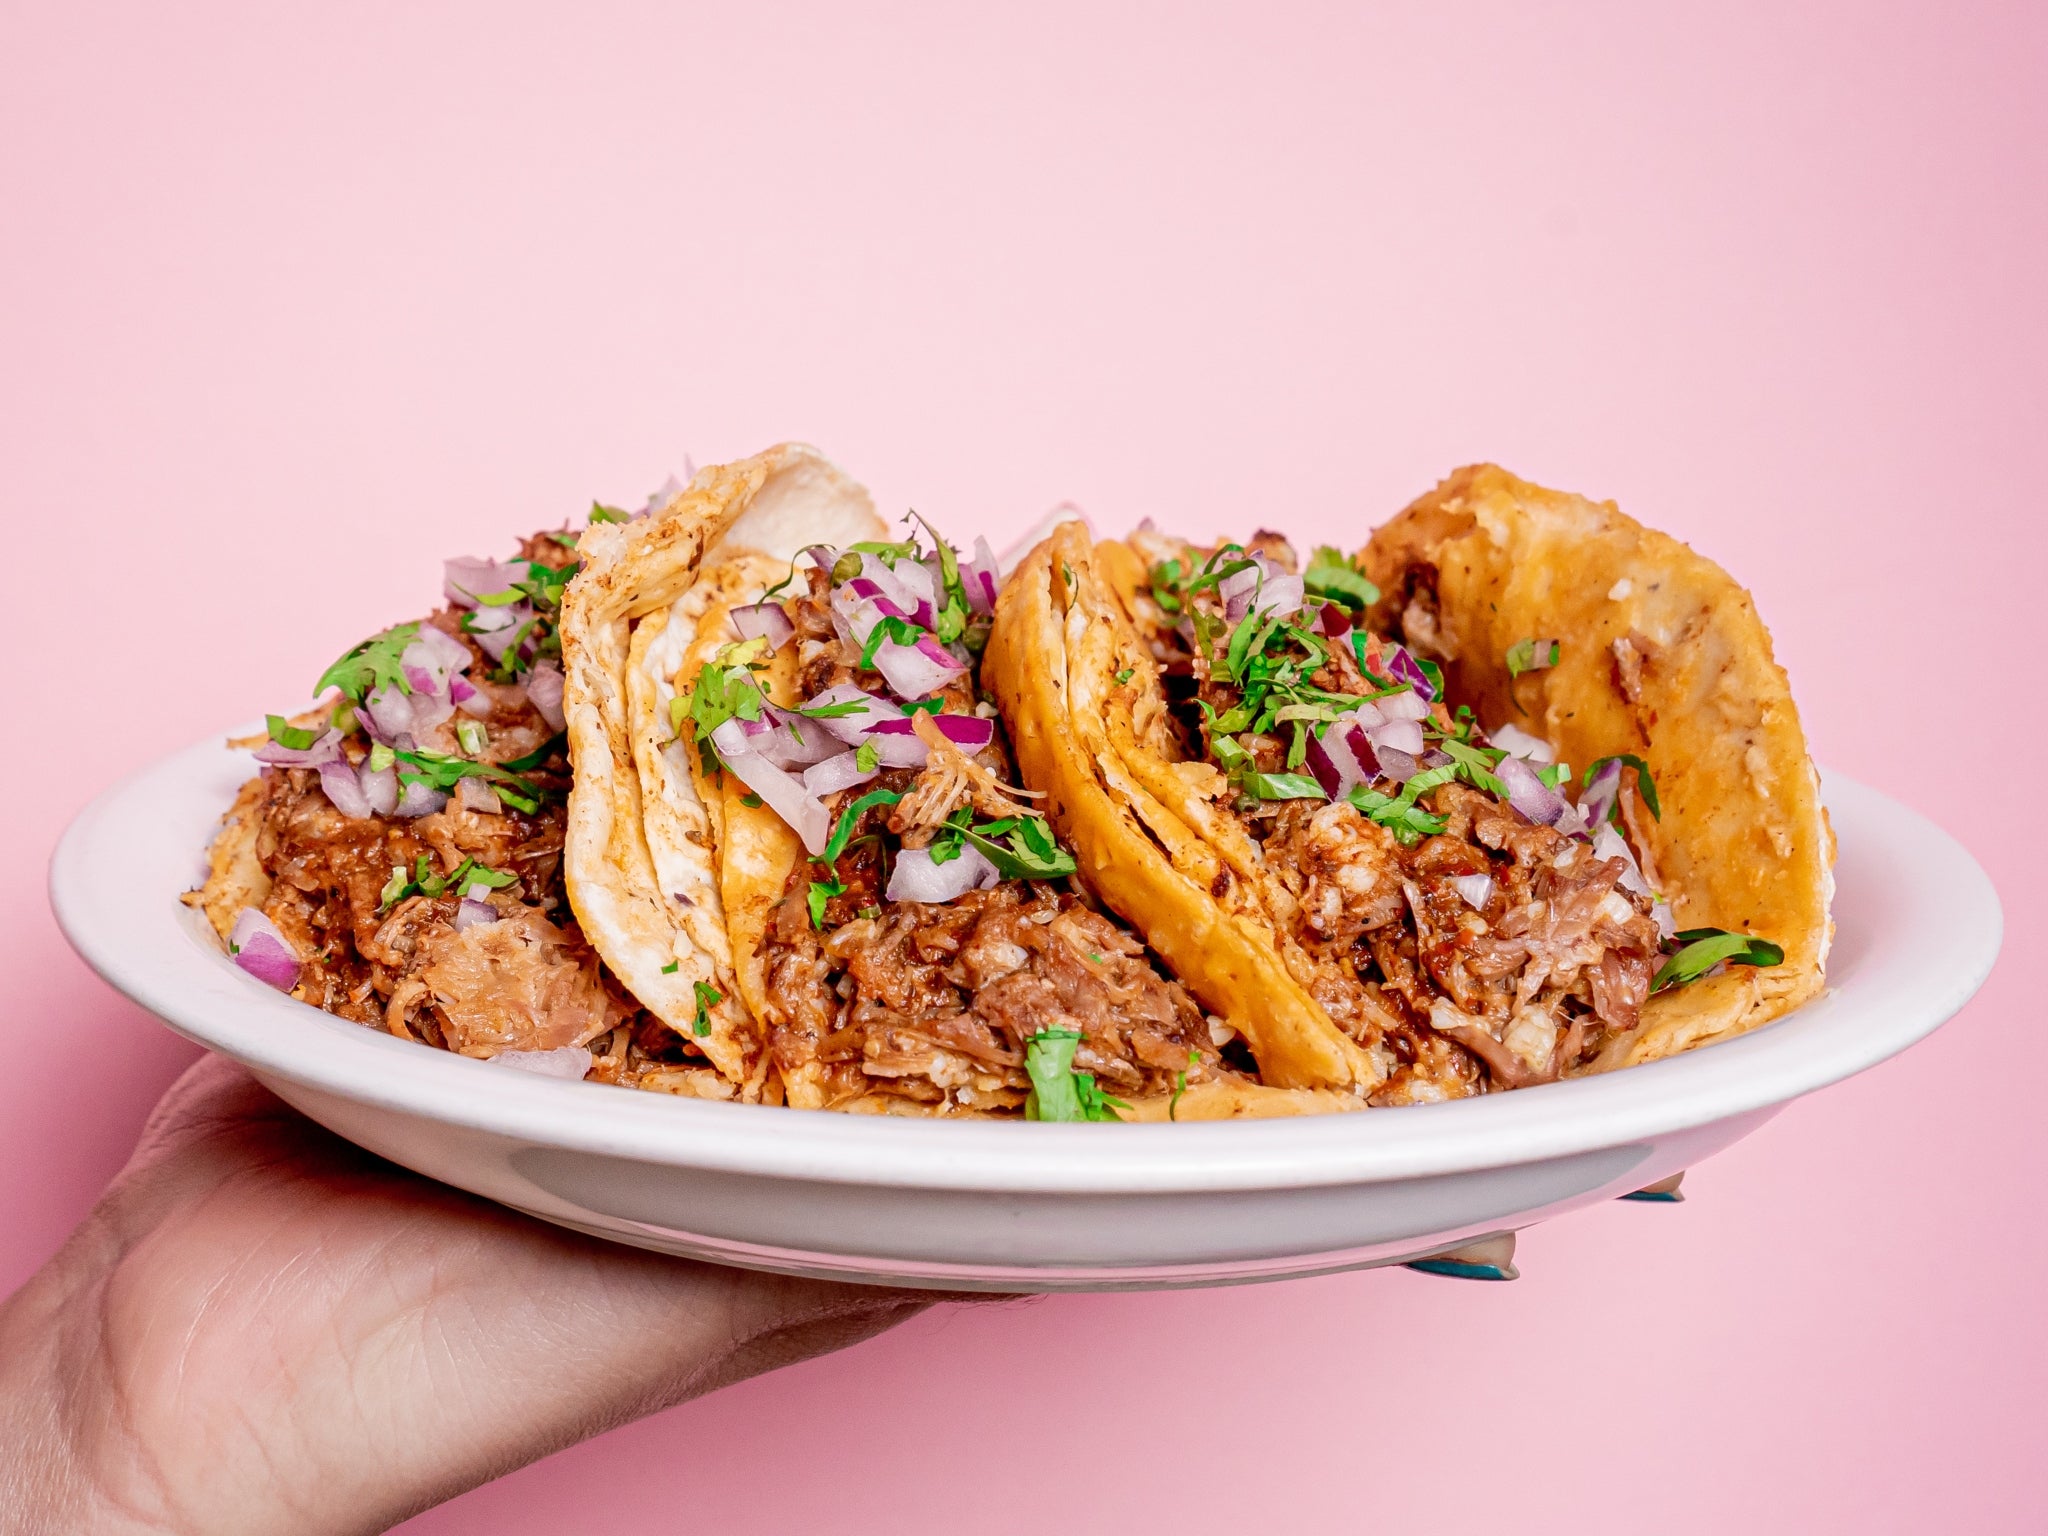 Birria tacos topped the list